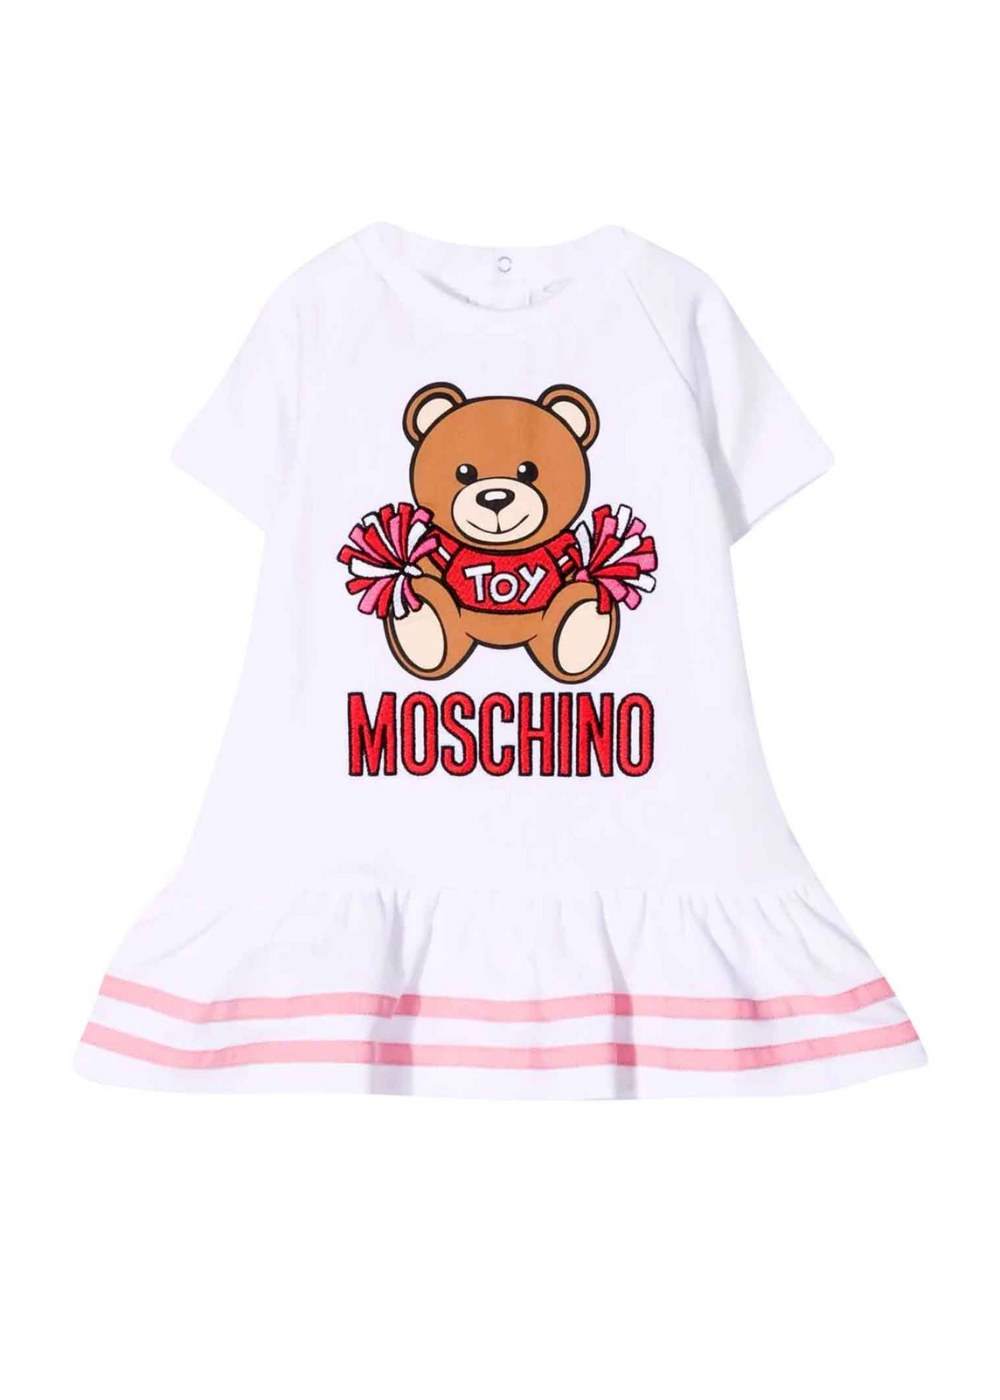 Featured image for “Moschino Abito In Felpa”